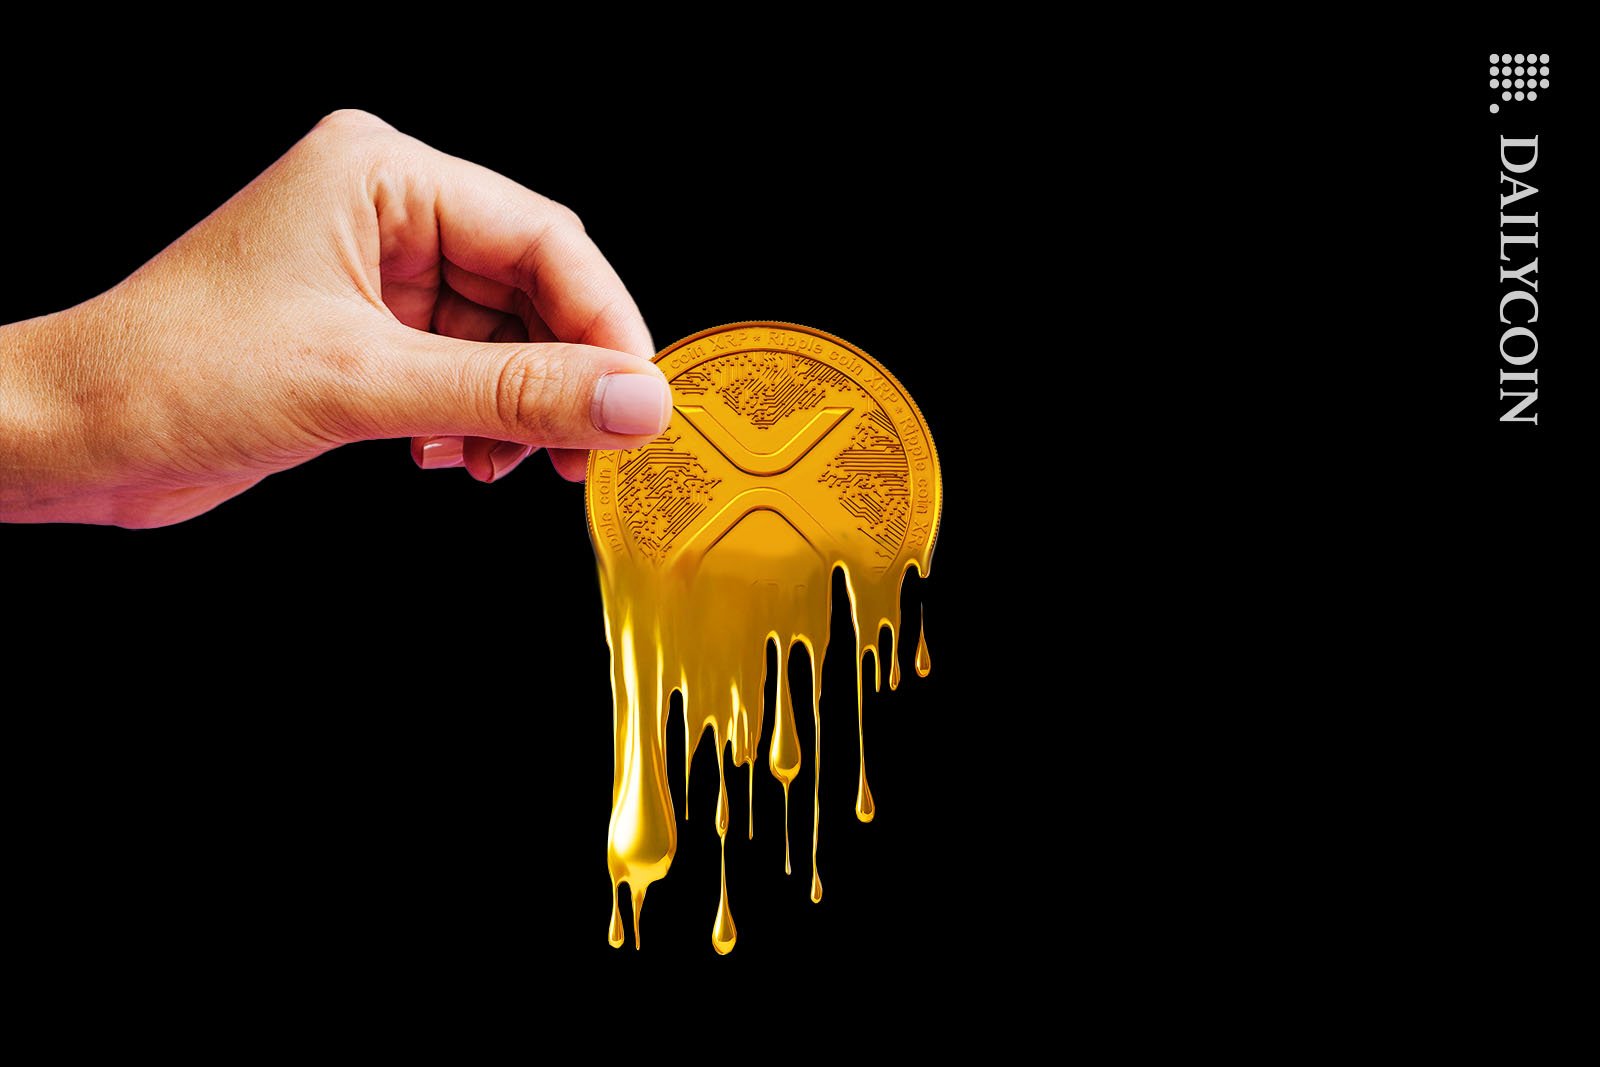 A hand holding a melting XRP coin.